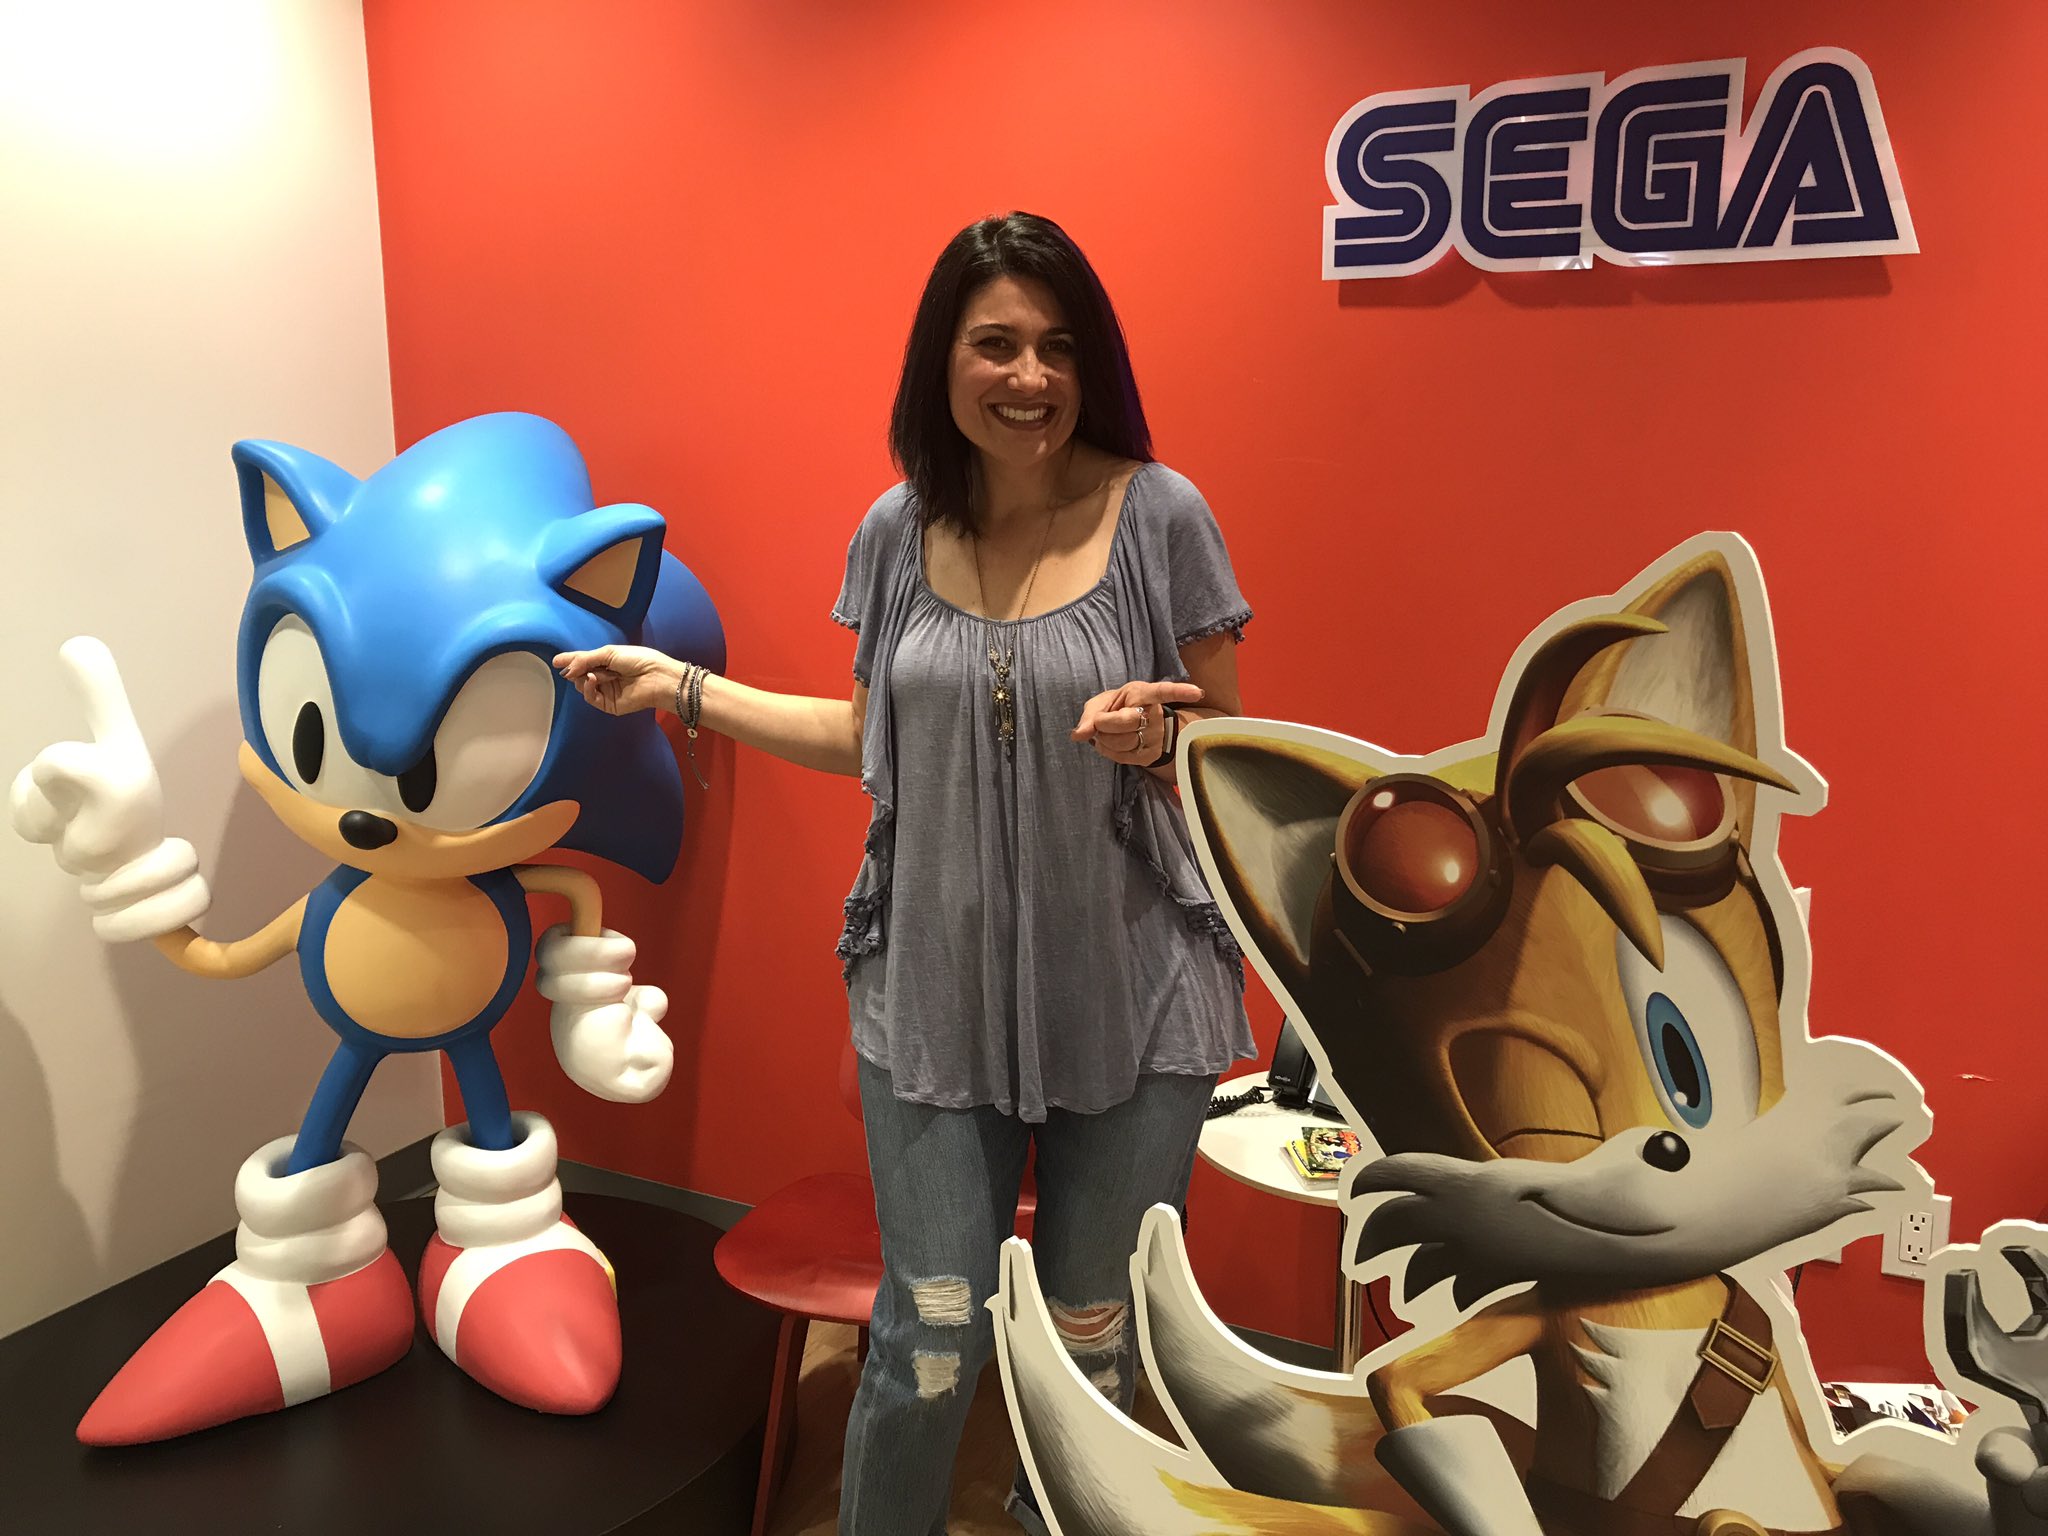 Colleen O'Shaughnessey talks voicing Tails in Sonic the Hedgehog 2